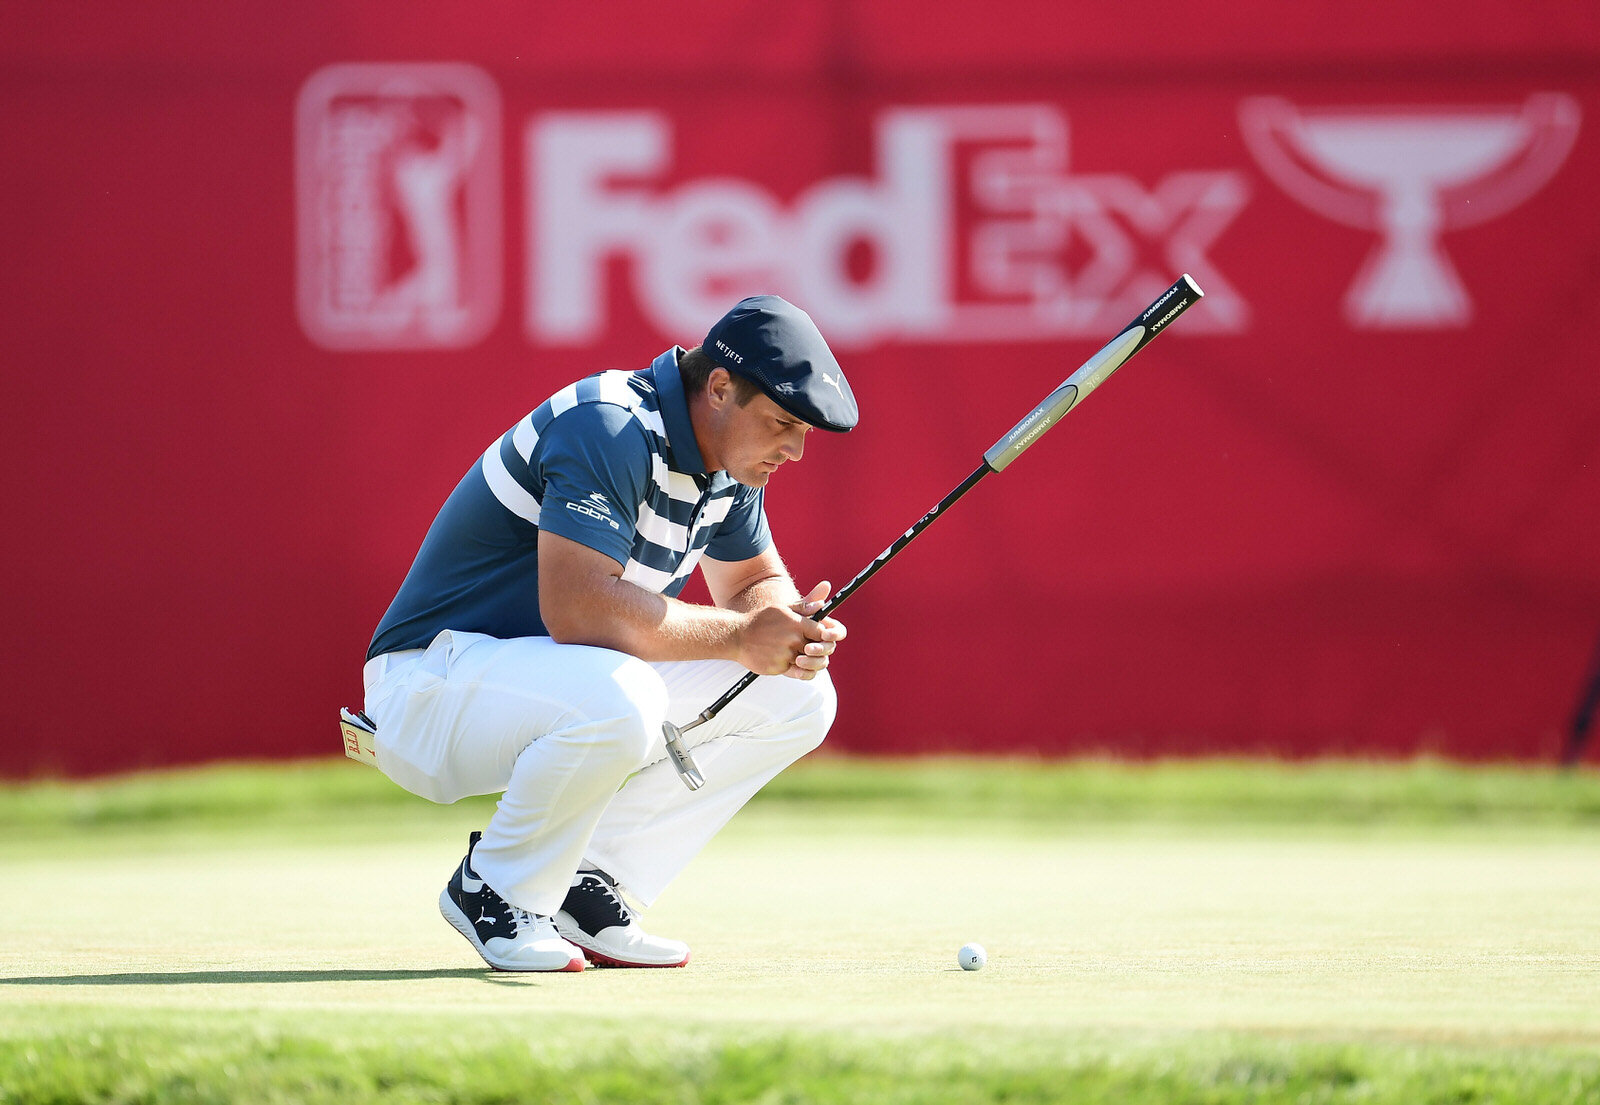  DETROIT, MICHIGAN - JULY 05: Bryson DeChambeau of the United States lines up a putt on the 15th green during the final round of the Rocket Mortgage Classic on July 05, 2020 at the Detroit Golf Club in Detroit, Michigan. (Photo by Stacy Revere/Getty 